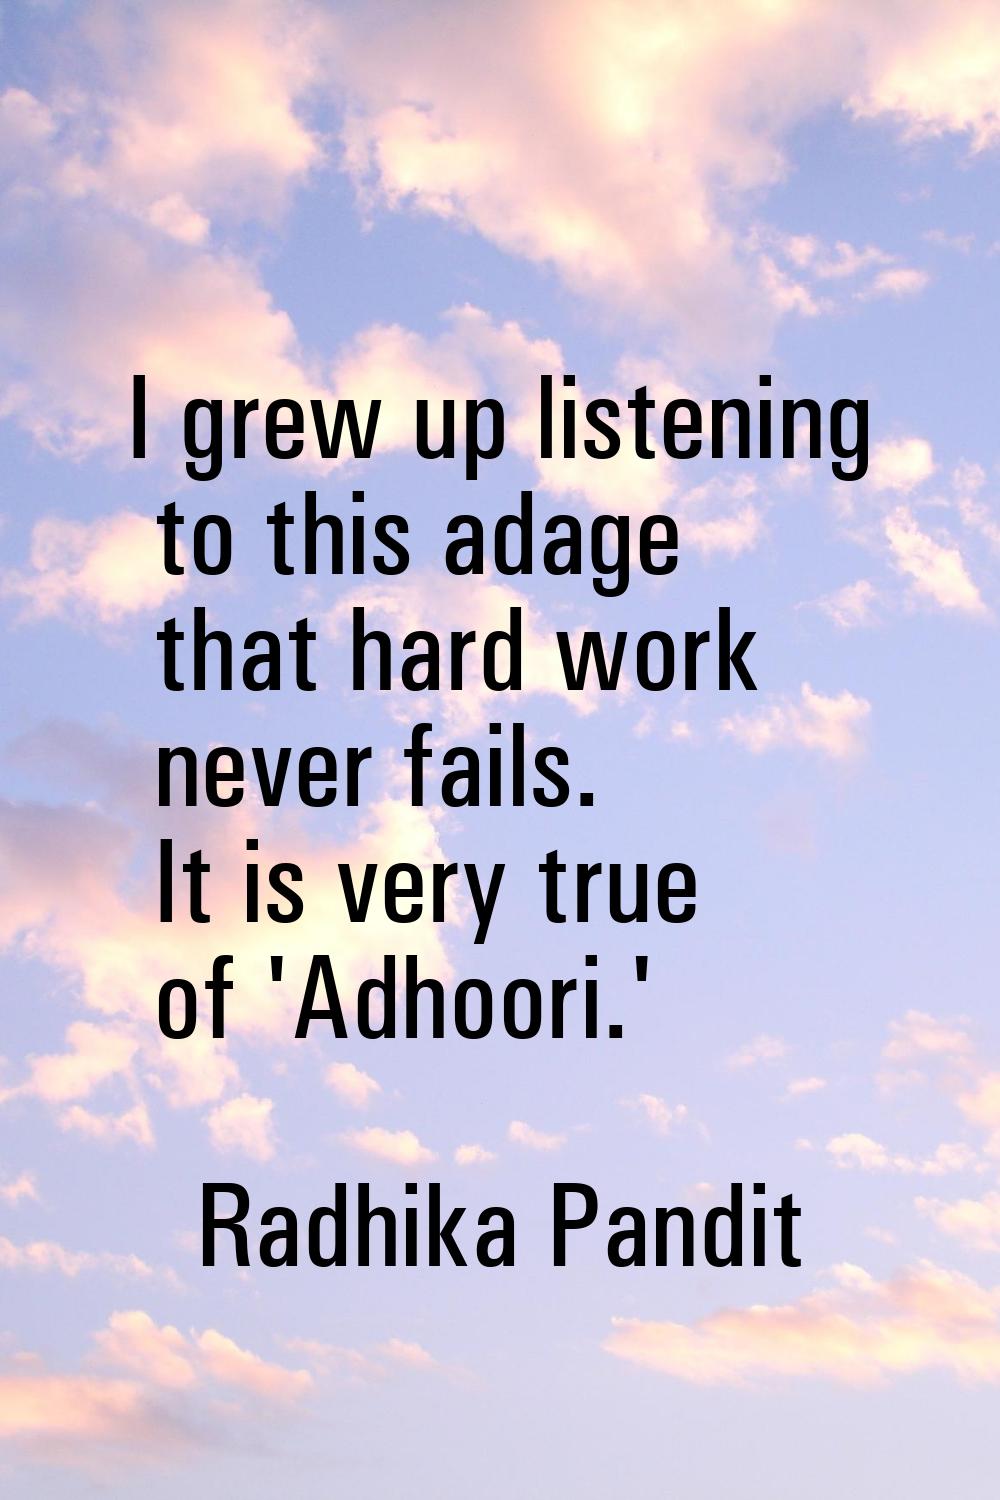 I grew up listening to this adage that hard work never fails. It is very true of 'Adhoori.'